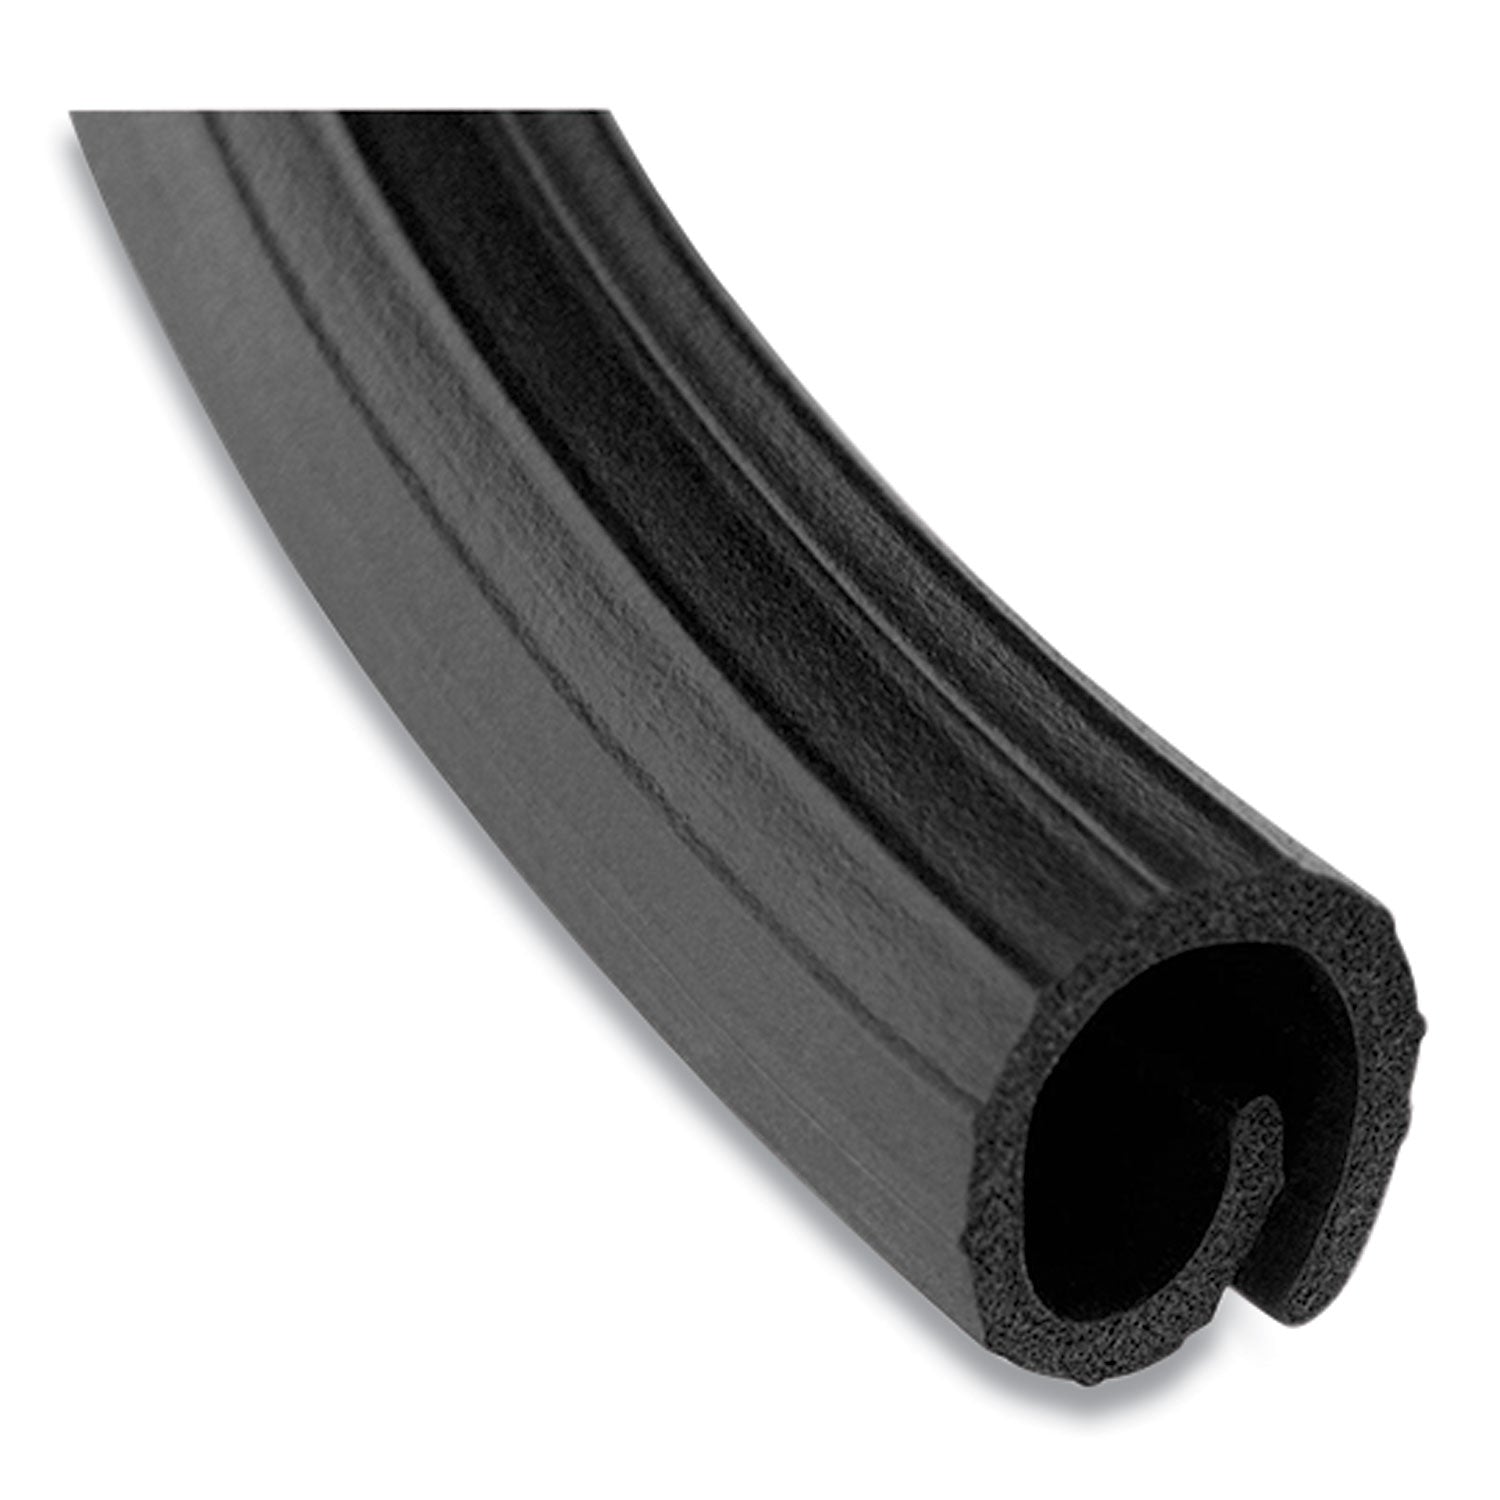 flexi-cable-wrap-05-to-1-x-12-ft-black_rboutwfcw12bk - 3